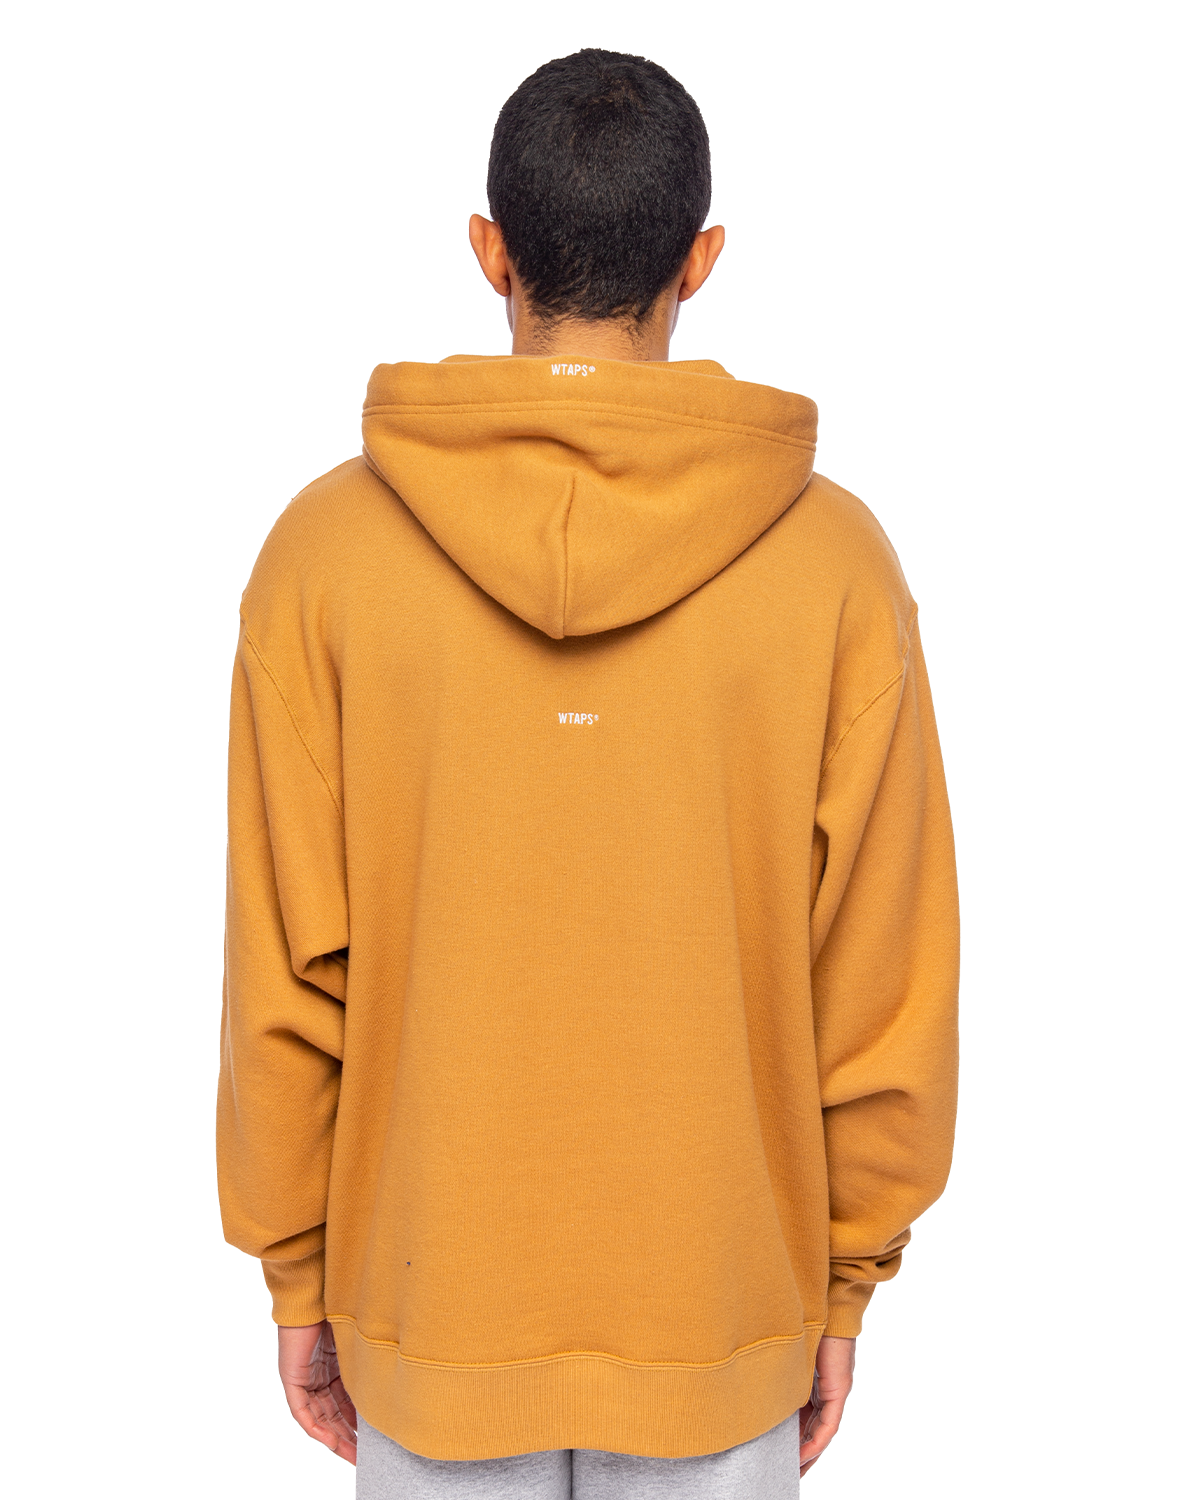 All 01 / Hoody / Cotton